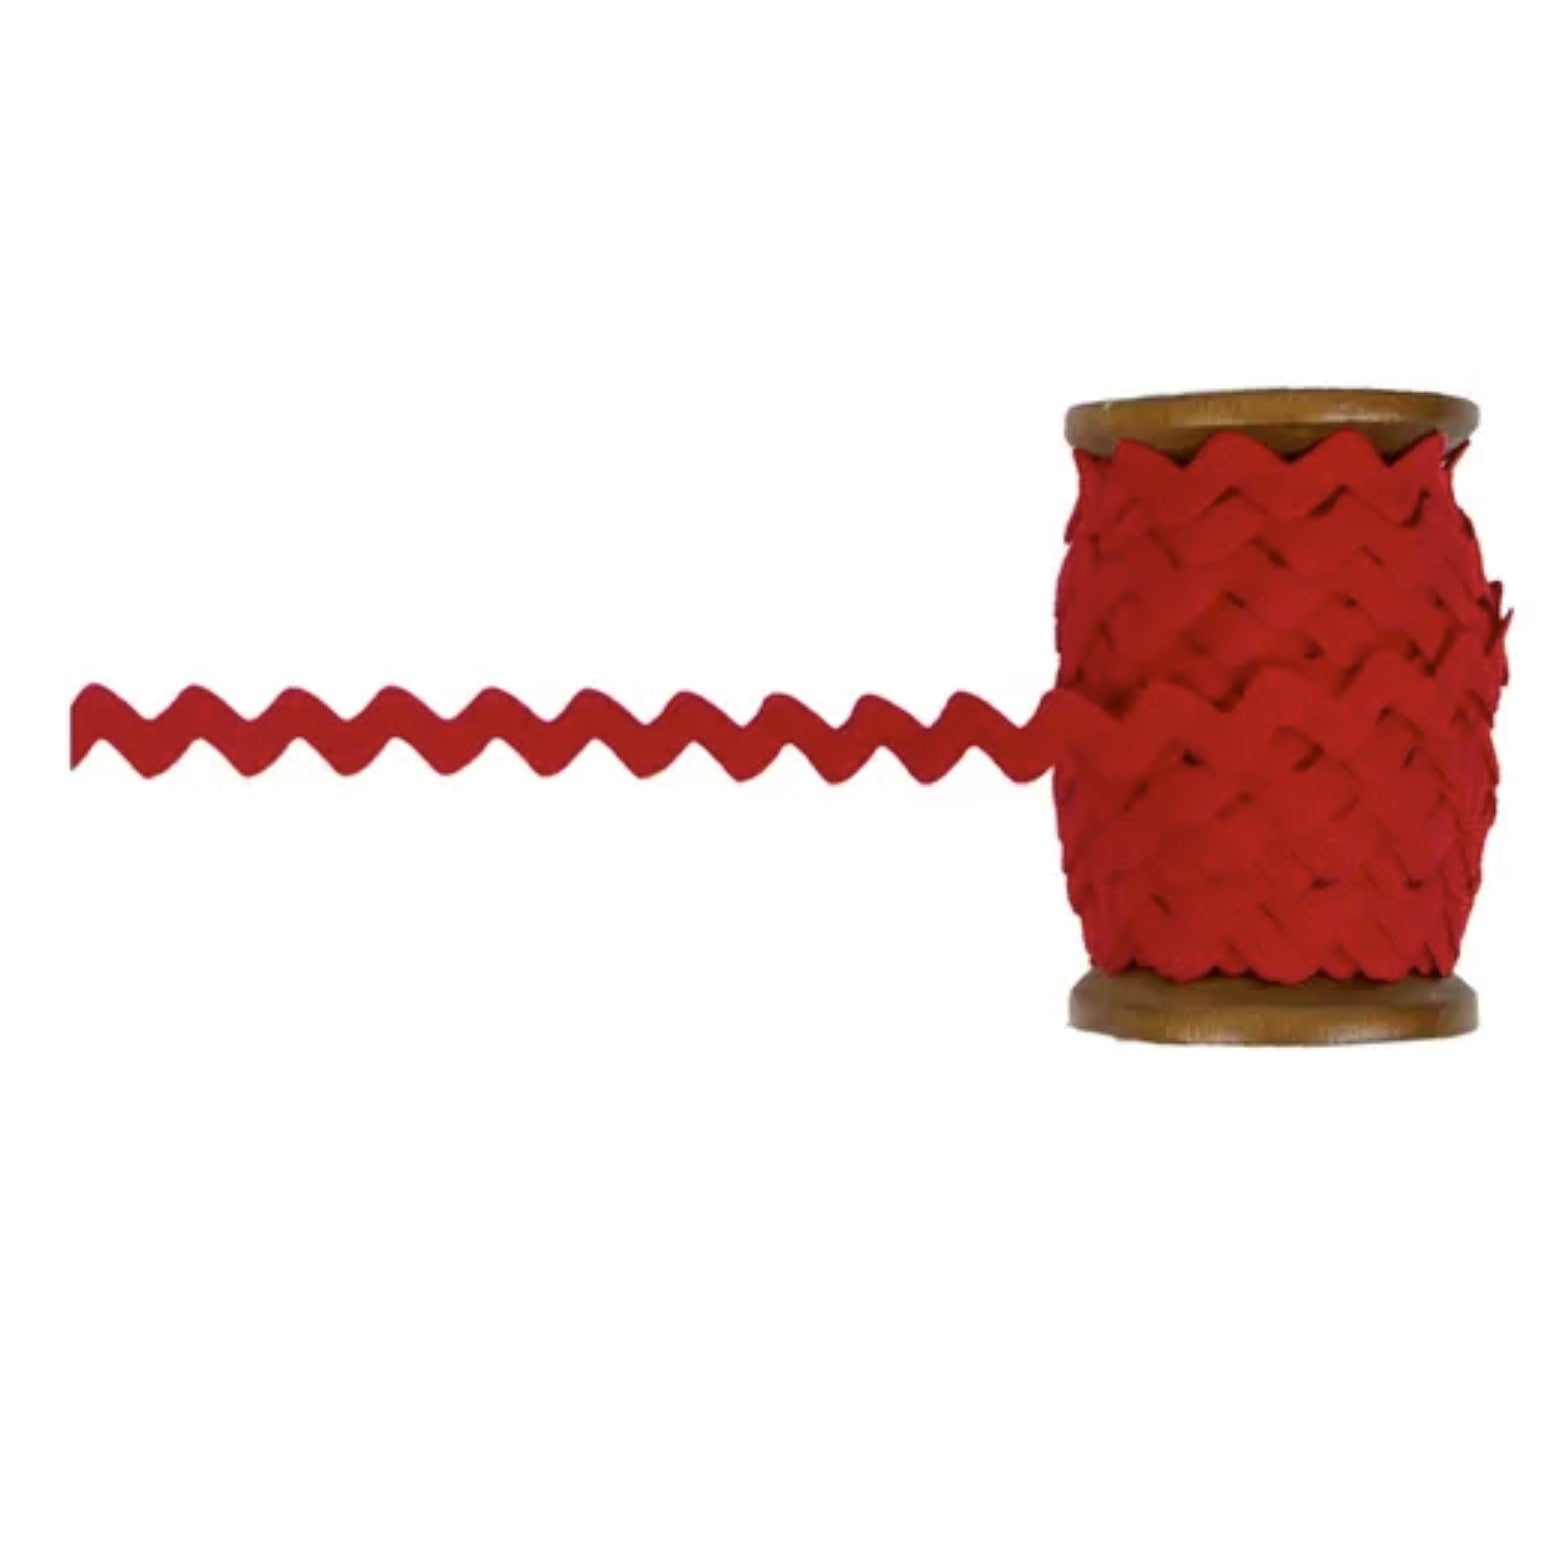 Riley Red Color, 12 yards Spool, Large Ric Rac Vintage Trim by Lori Holt of Bee in my Bonnet, Various Sizes